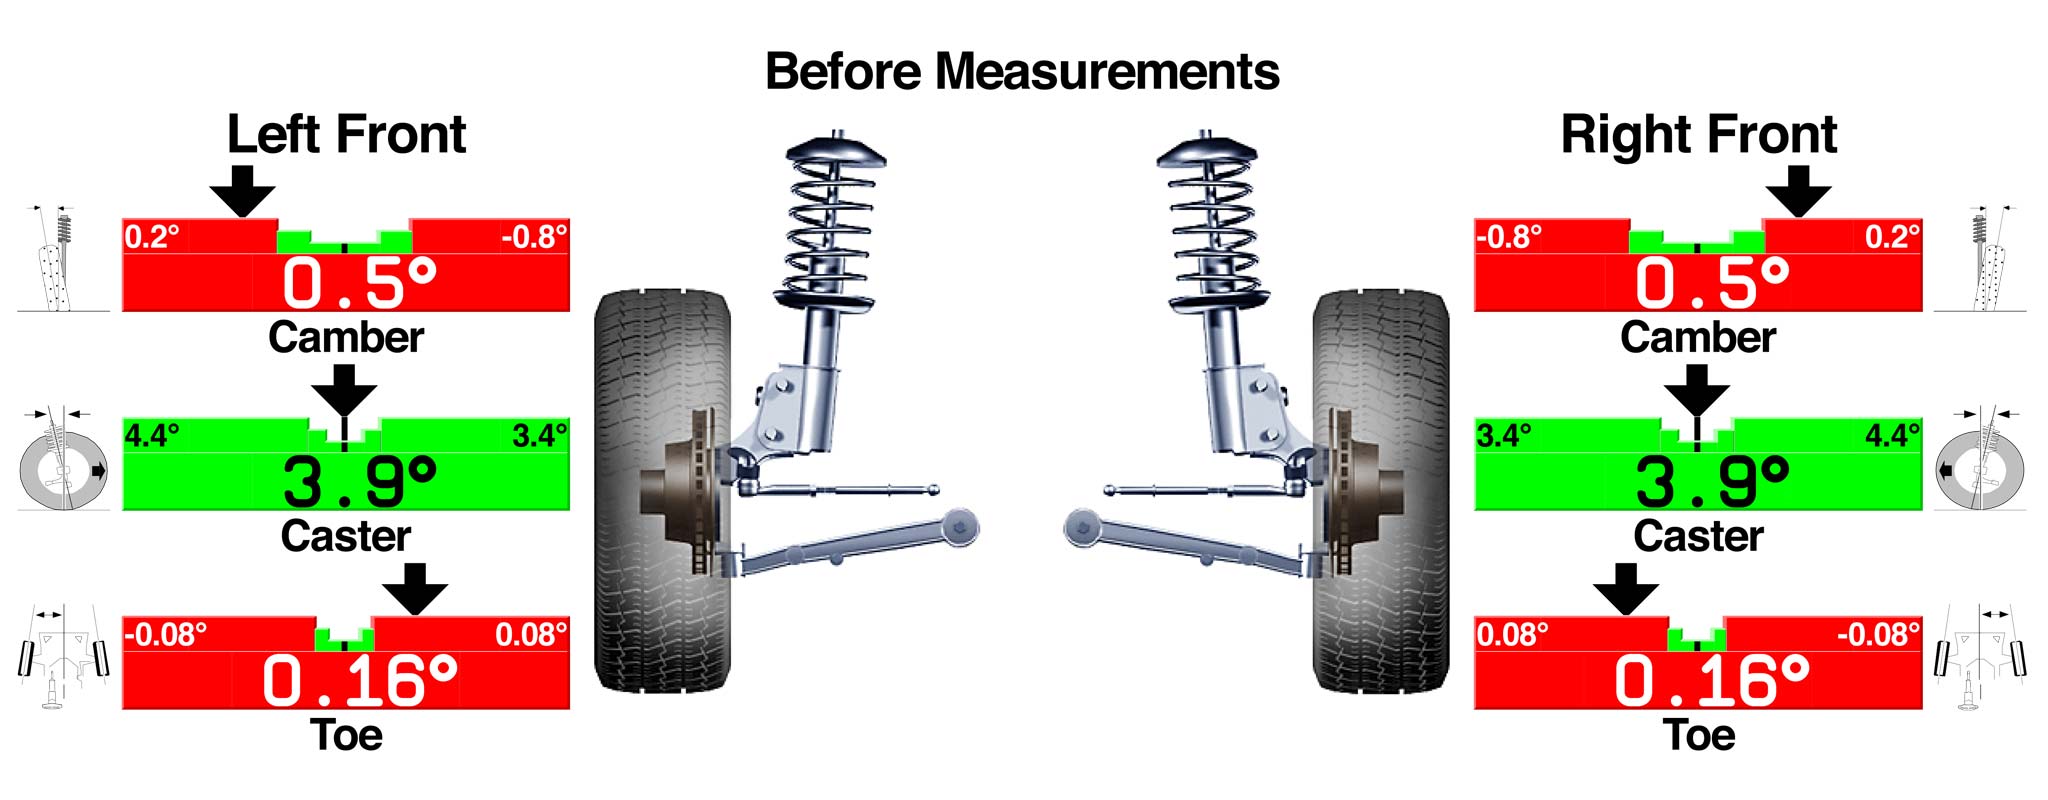 Wheel Alignment, What Is It And When Should It Be Done?